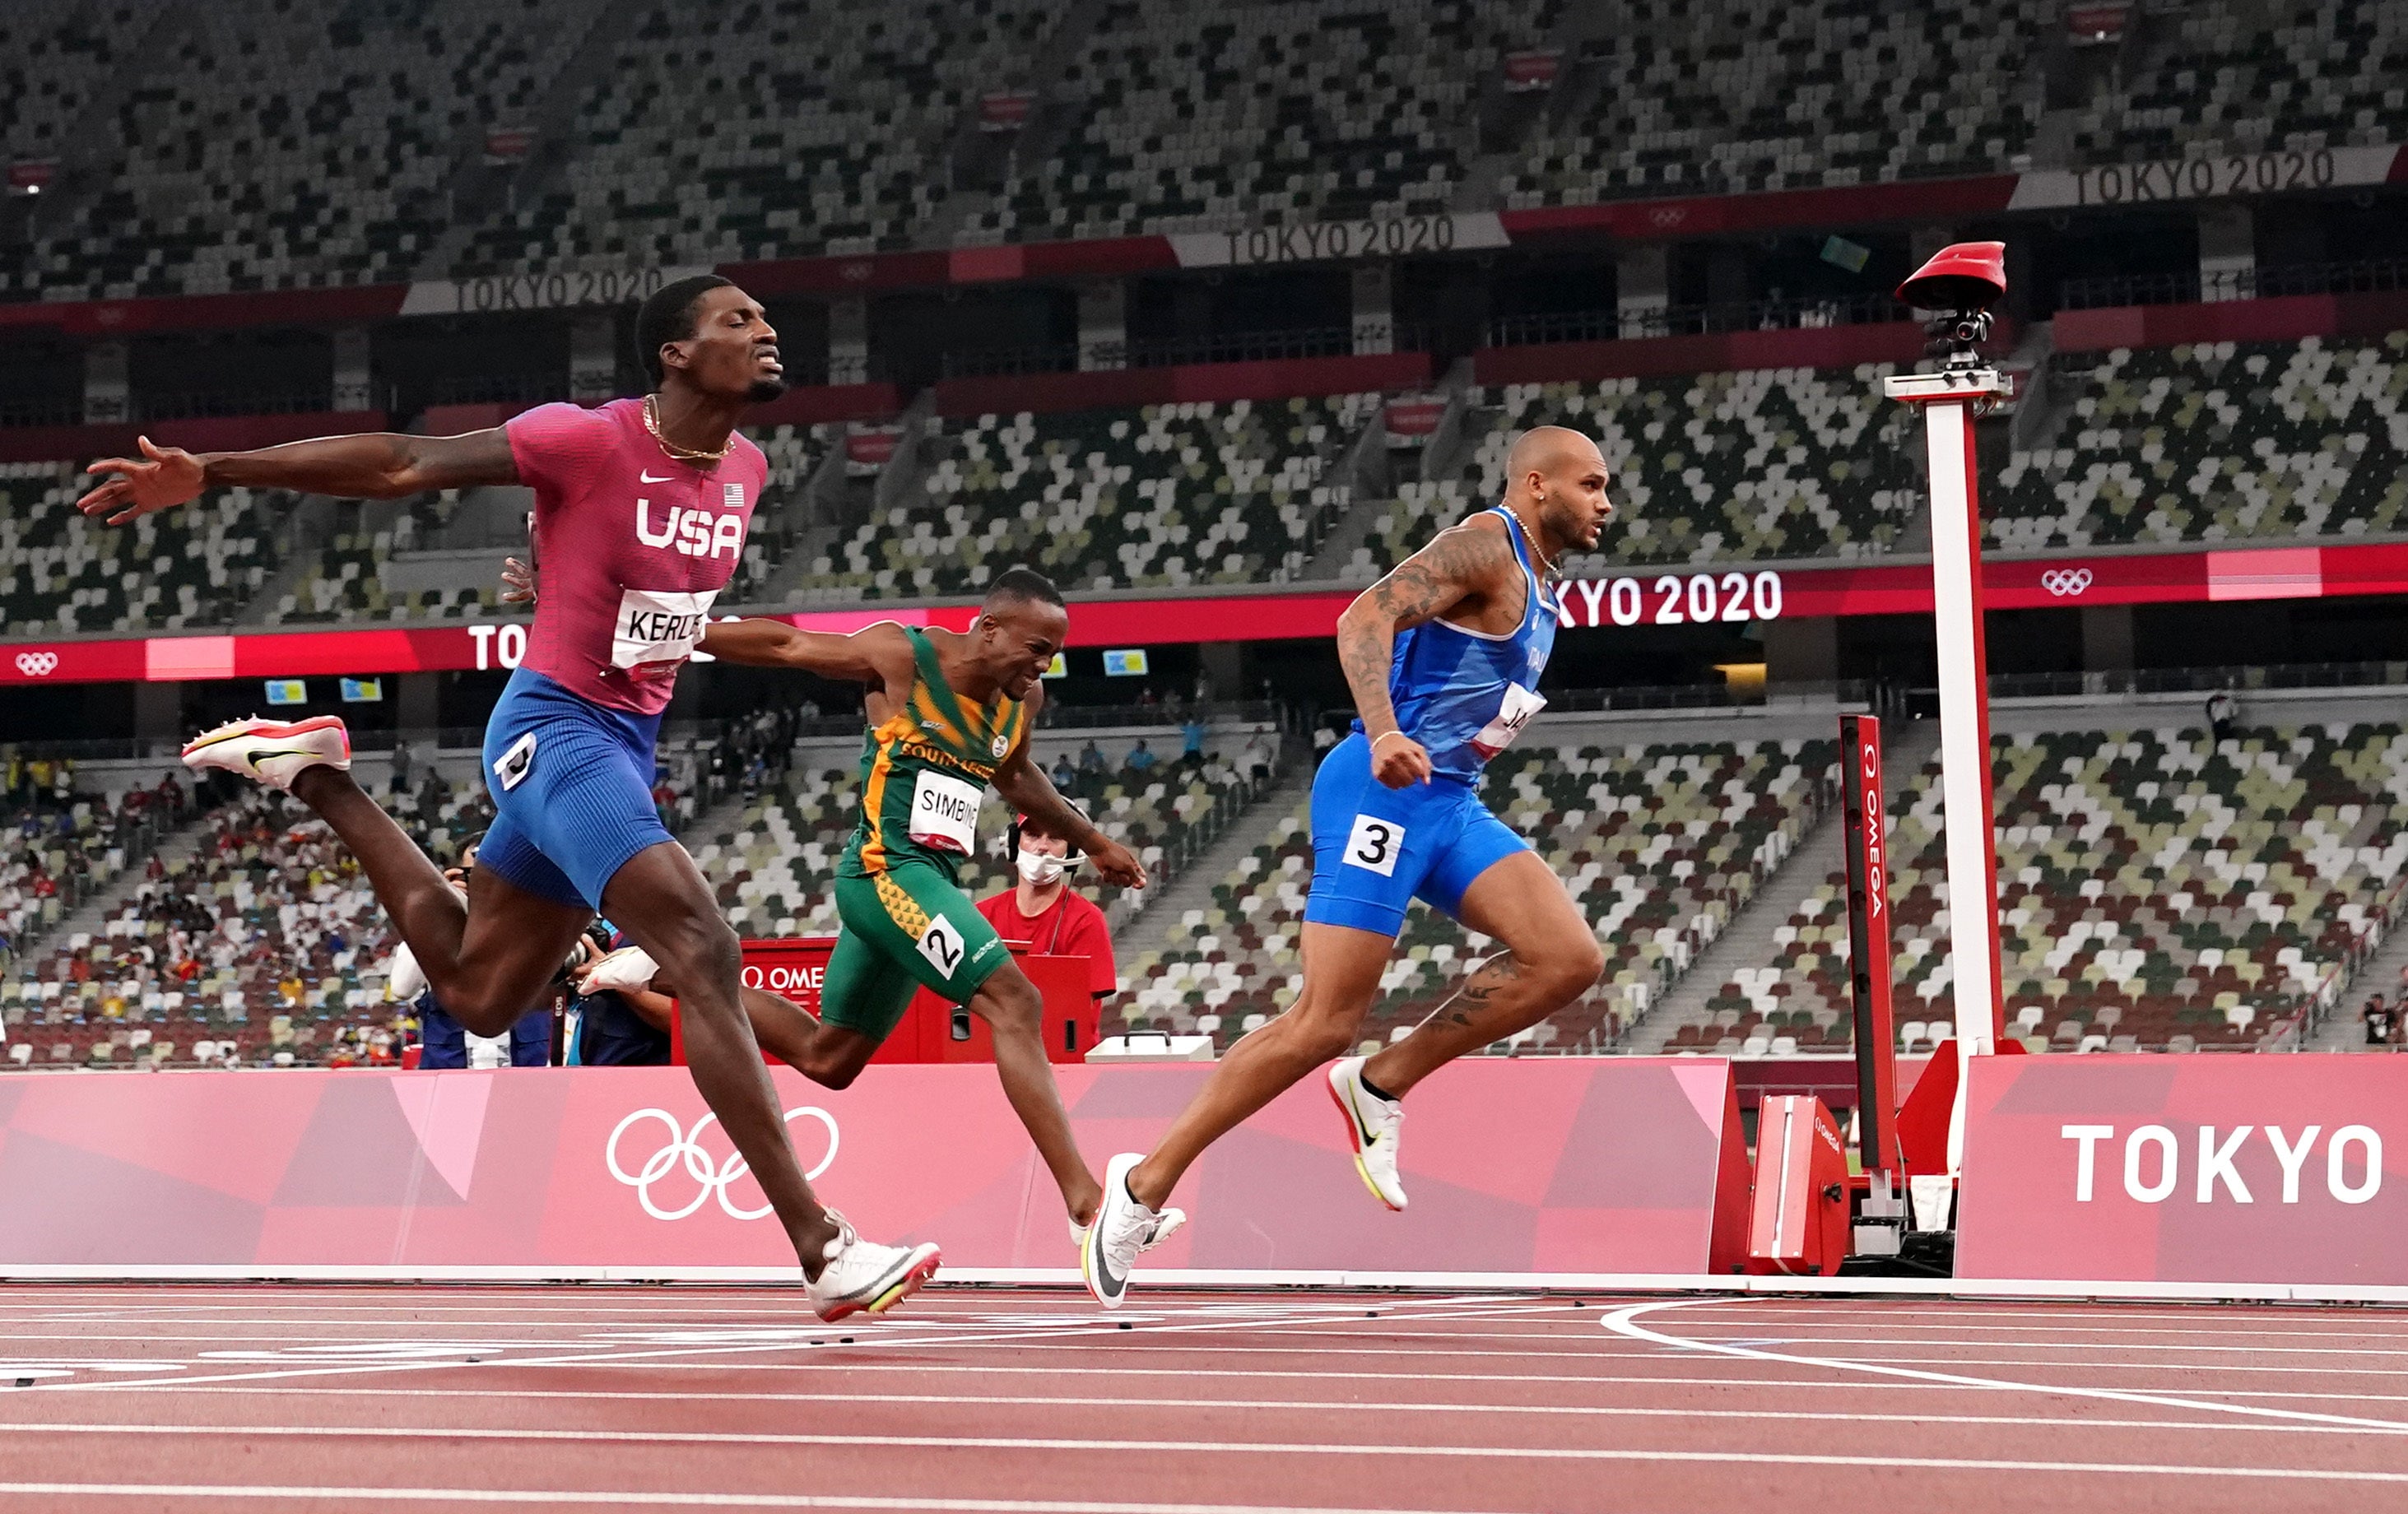 Italy’s Lamont Marcell Jacobs wins the 100m in Tokyo, posting a third successive personal best in the process